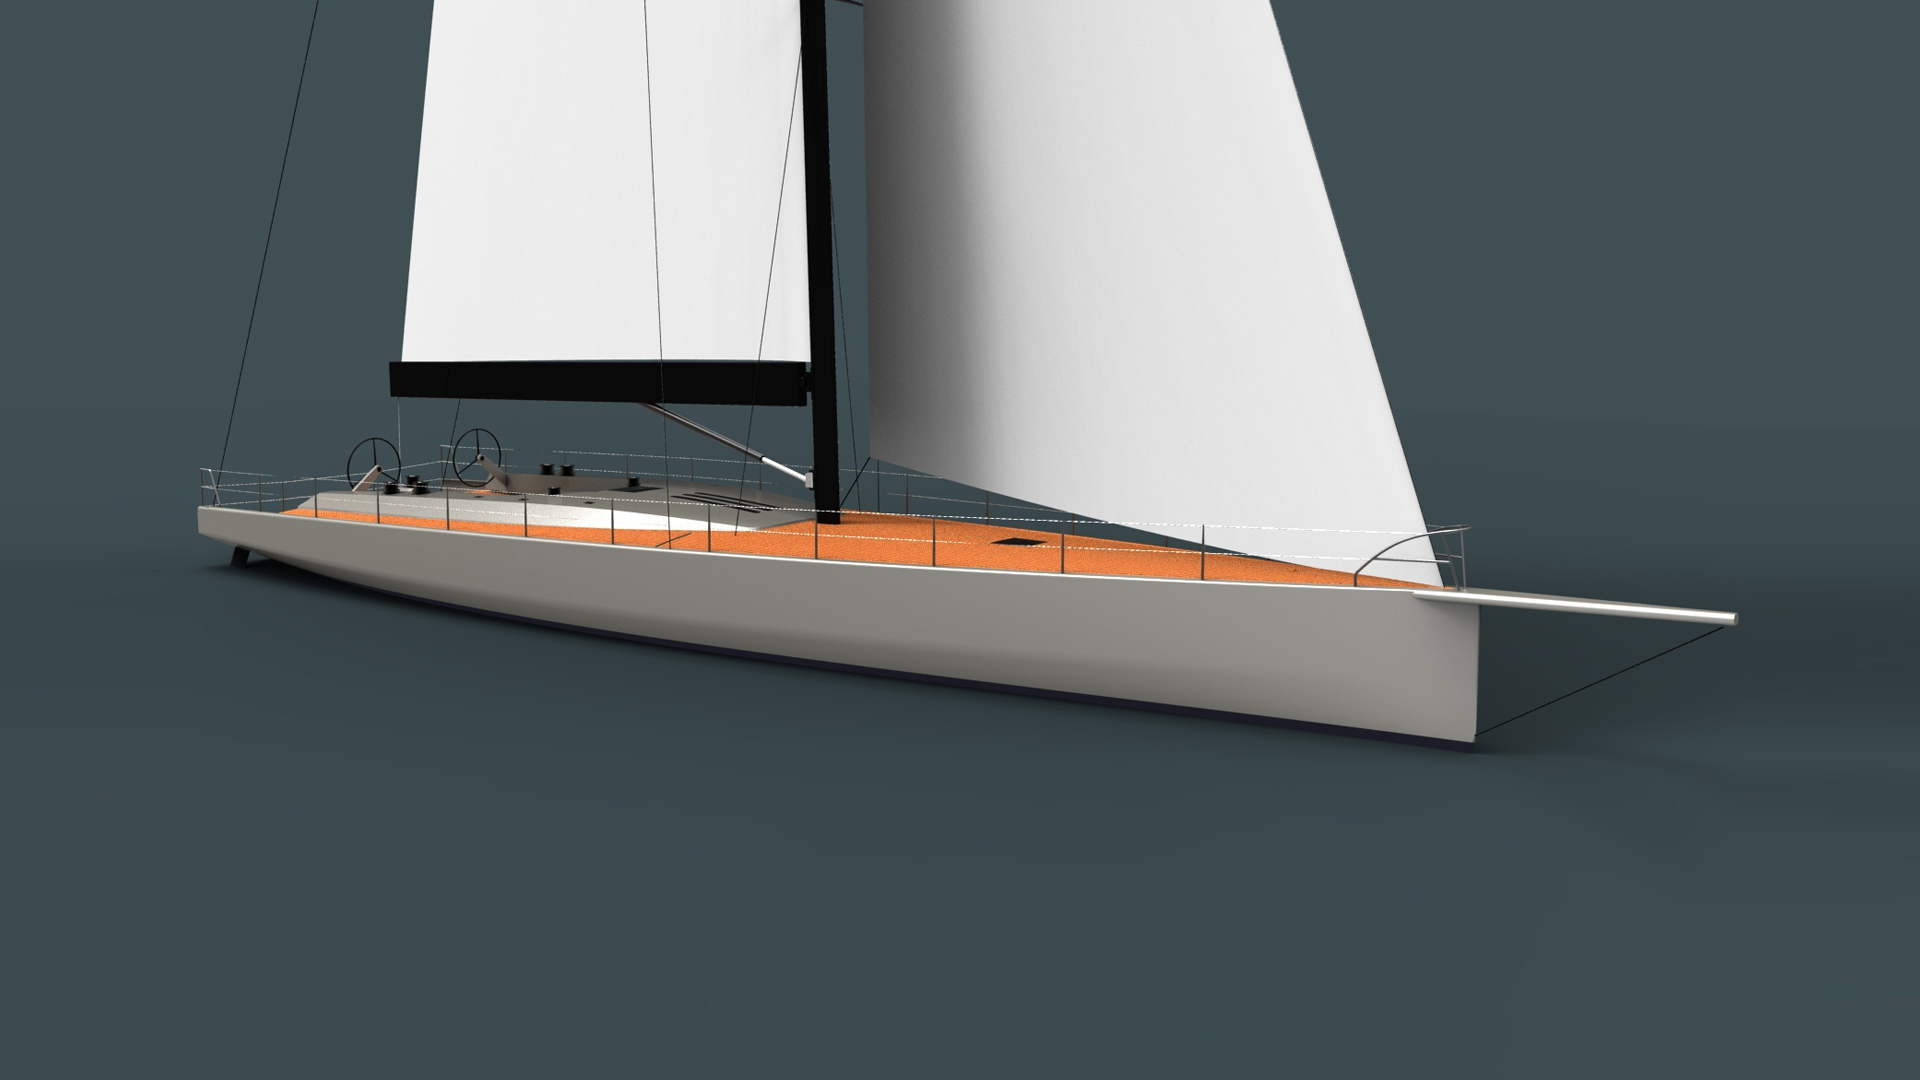 This is the mini maxi IRC / ORC racing version of our 84' racer cruiser superyacht design, created in the style made famous and popular by Wally Yachts.